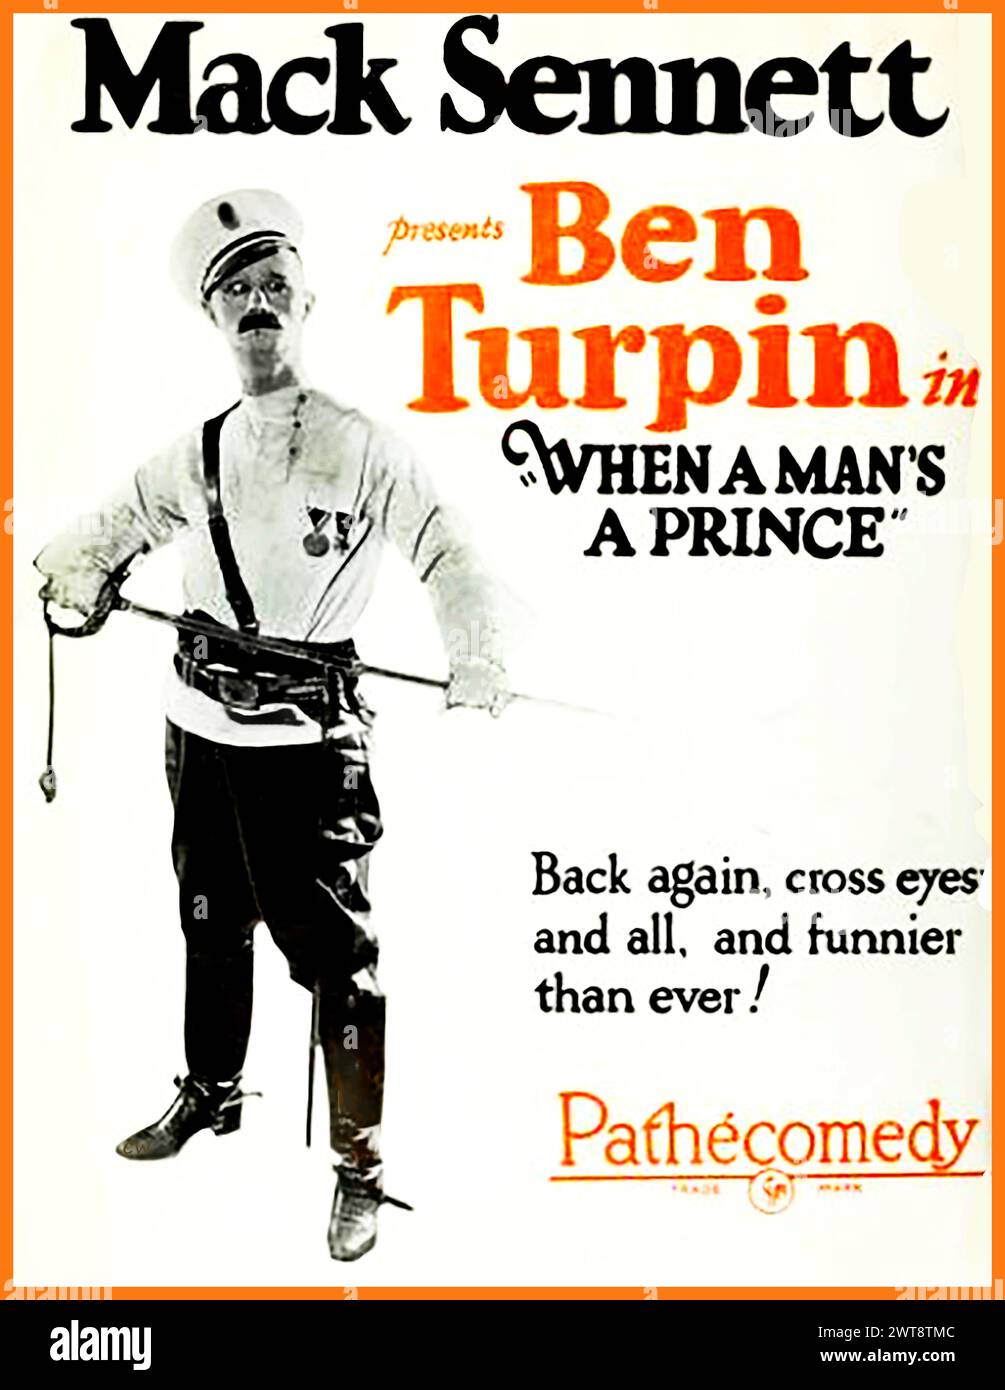 A Mack Sennet 1926 poster featuring a cross eyed Ben Turpin in When a Man's a Prince (Pathecomedy) where he co-starred with Madeline Hurlock, Dave Morris, Blanche Payson. Bernard 'Ben' Turpin (circa 1869 - 1940) was an American comedian and actor, best remembered for his work in silent films. Stock Photo